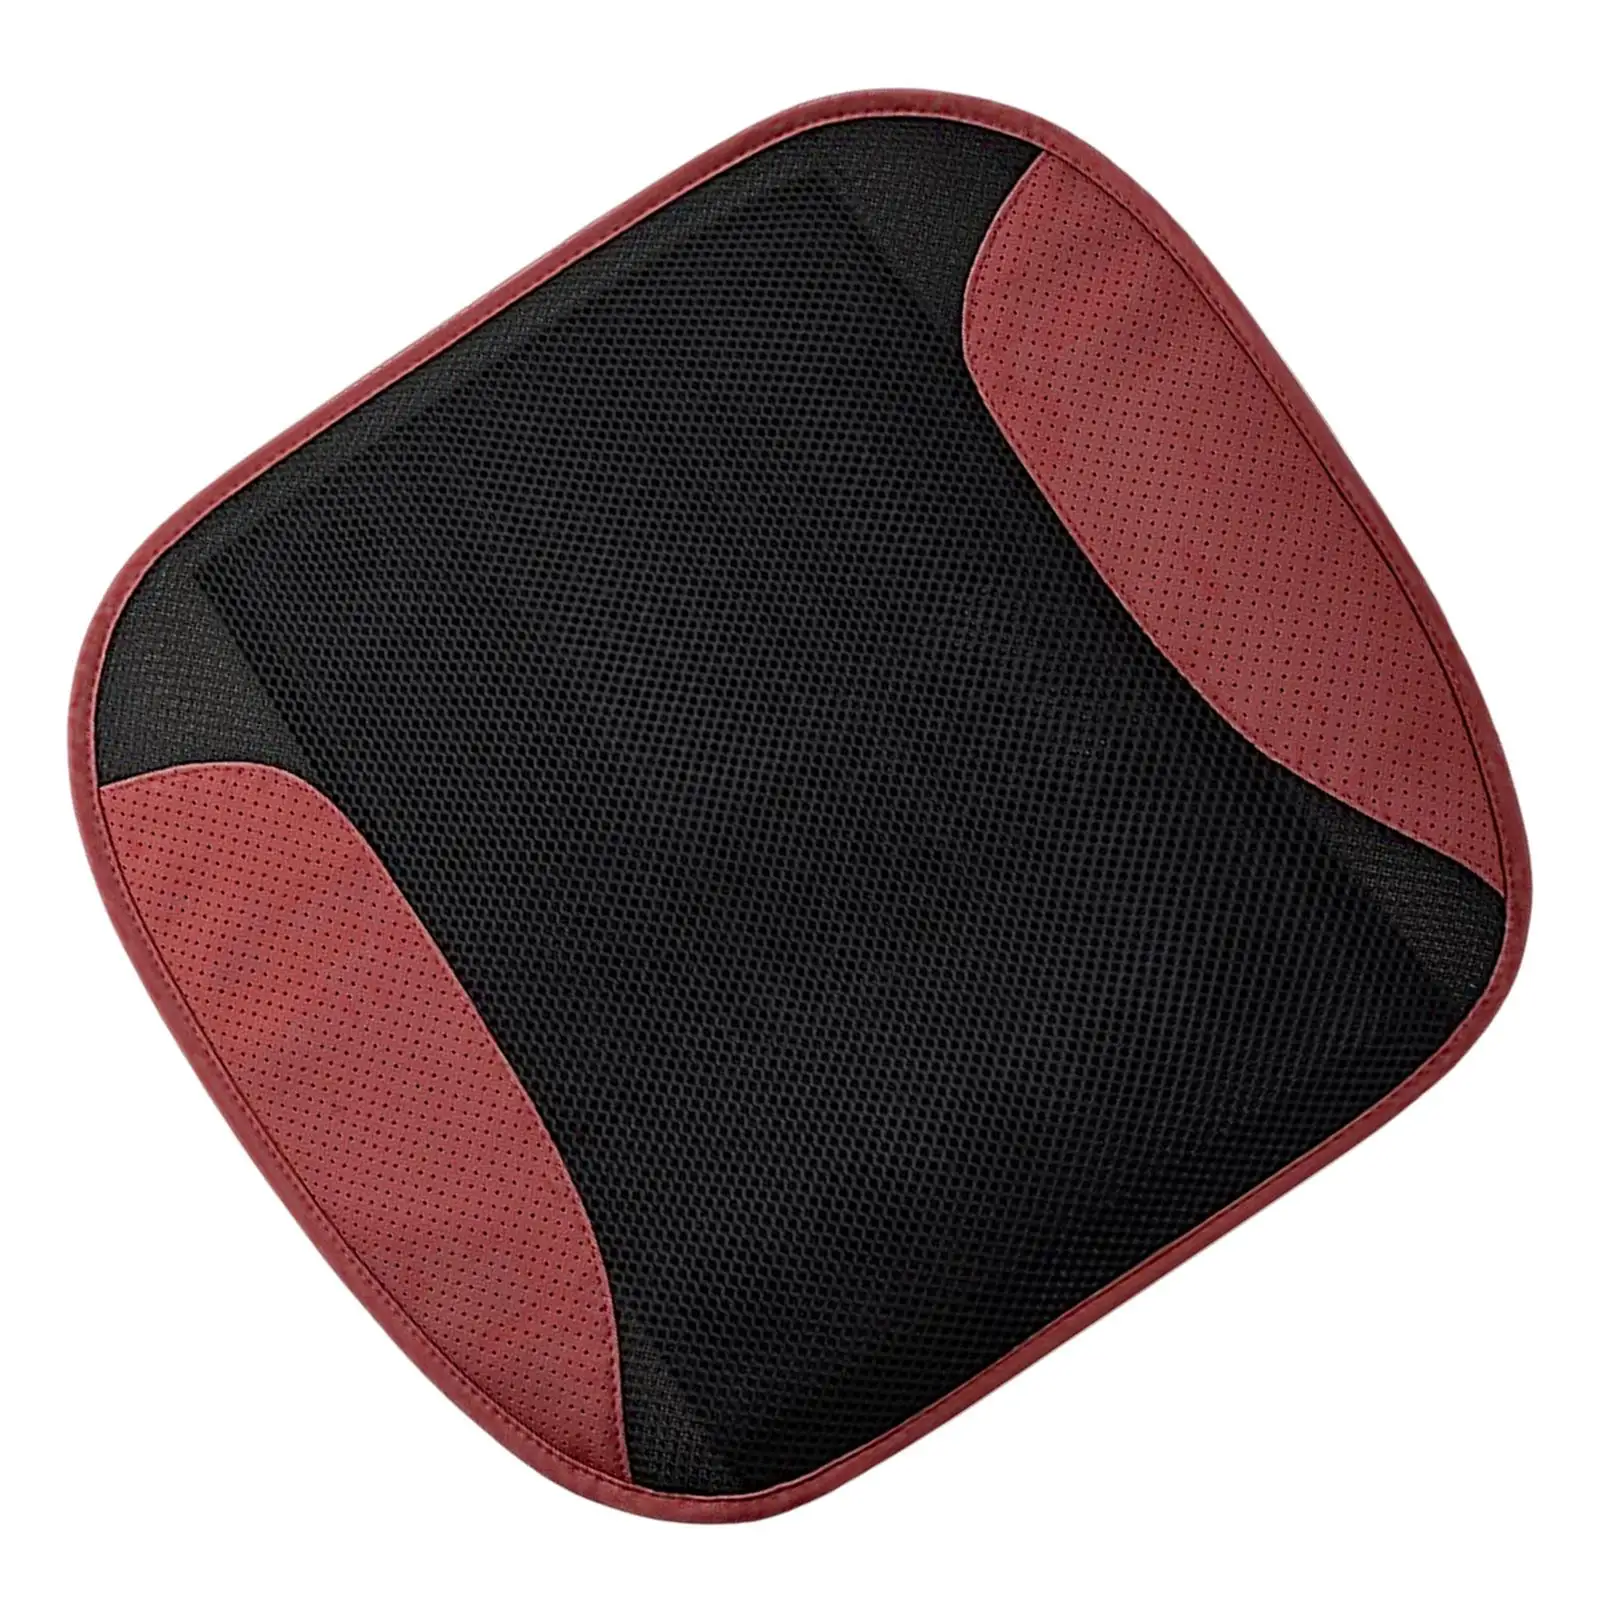 Ventilated Seat Flow Cooling Seat for Auto